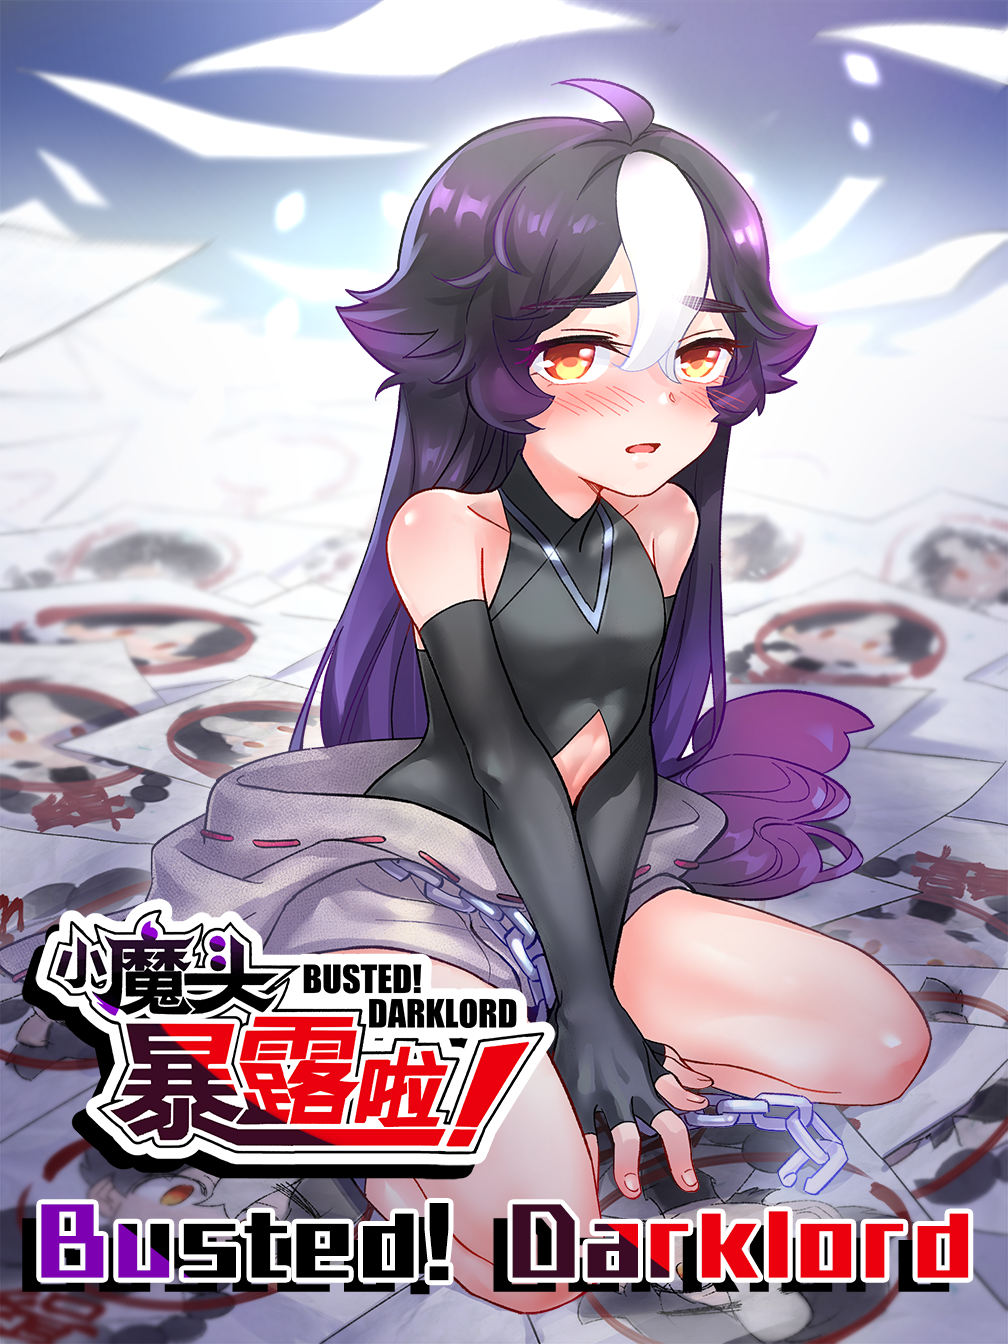 Demon lord busted